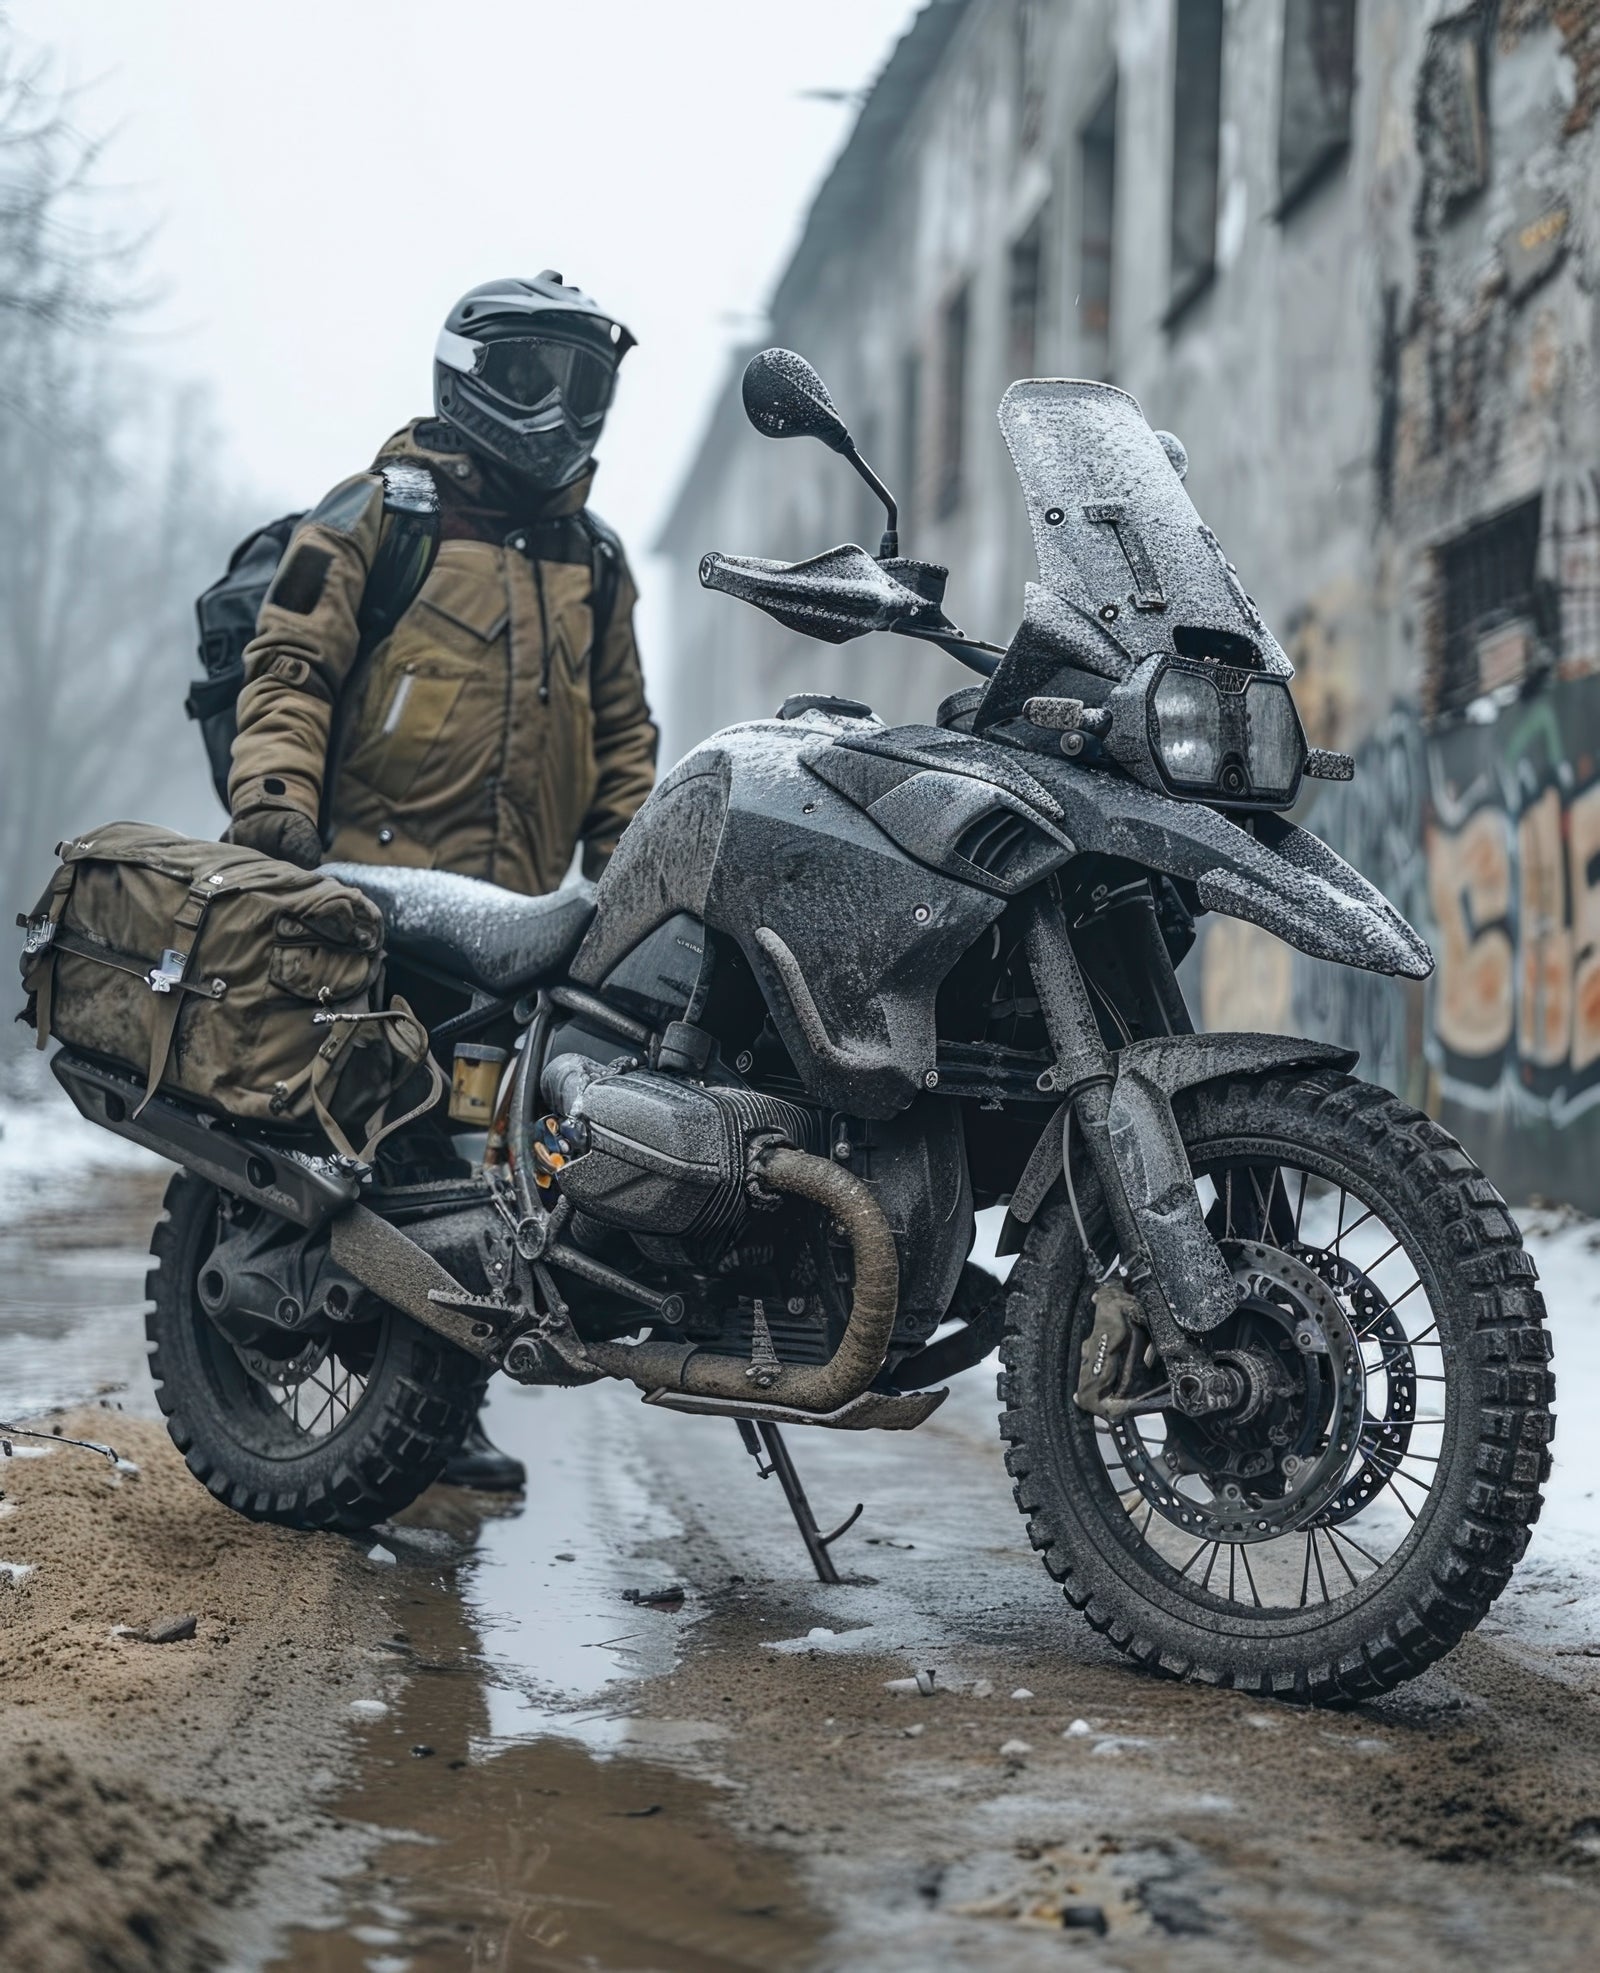 Waterproof Motorcycle Luggage: Keeping Your Gear Dry on the Road